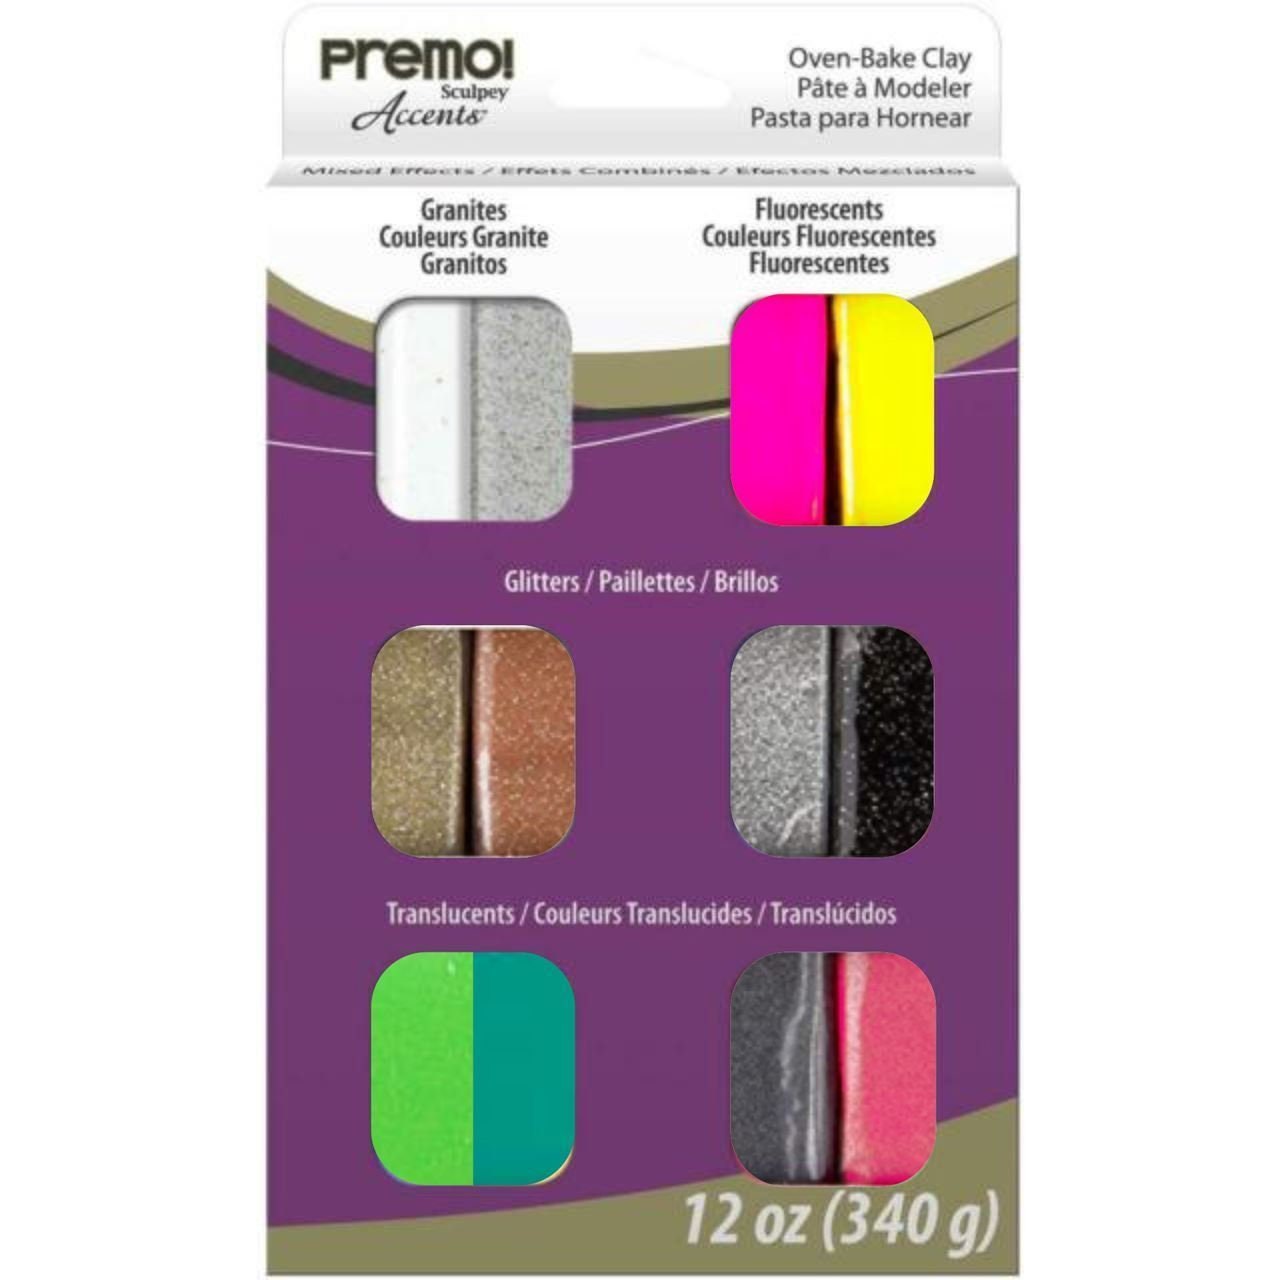 FIMO SOFT & EFFECTS BULK MULTIPACKS Choose Colours MODELLING POLYMER CLAY